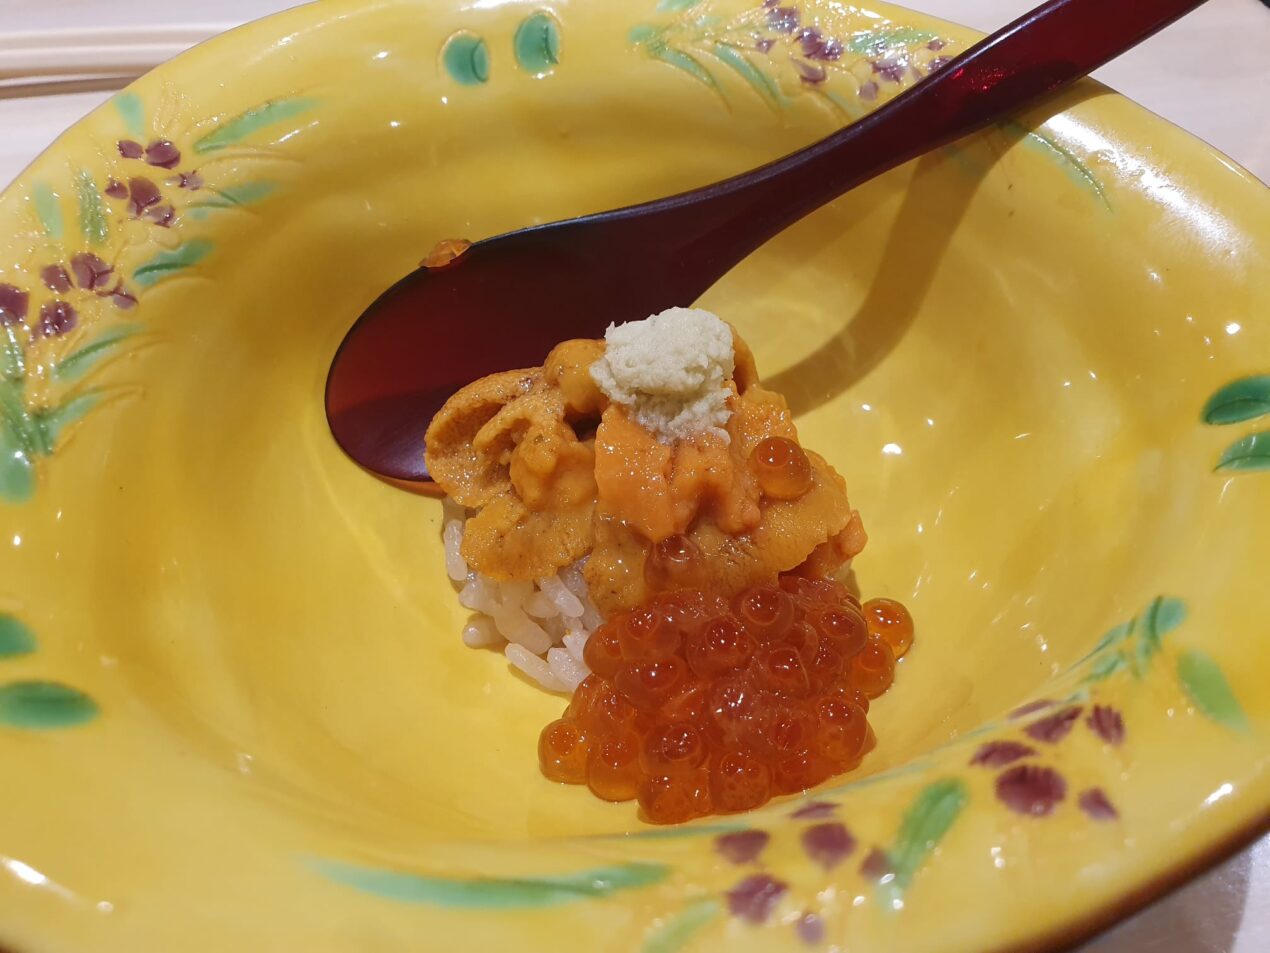 uni and salmon roe over rice